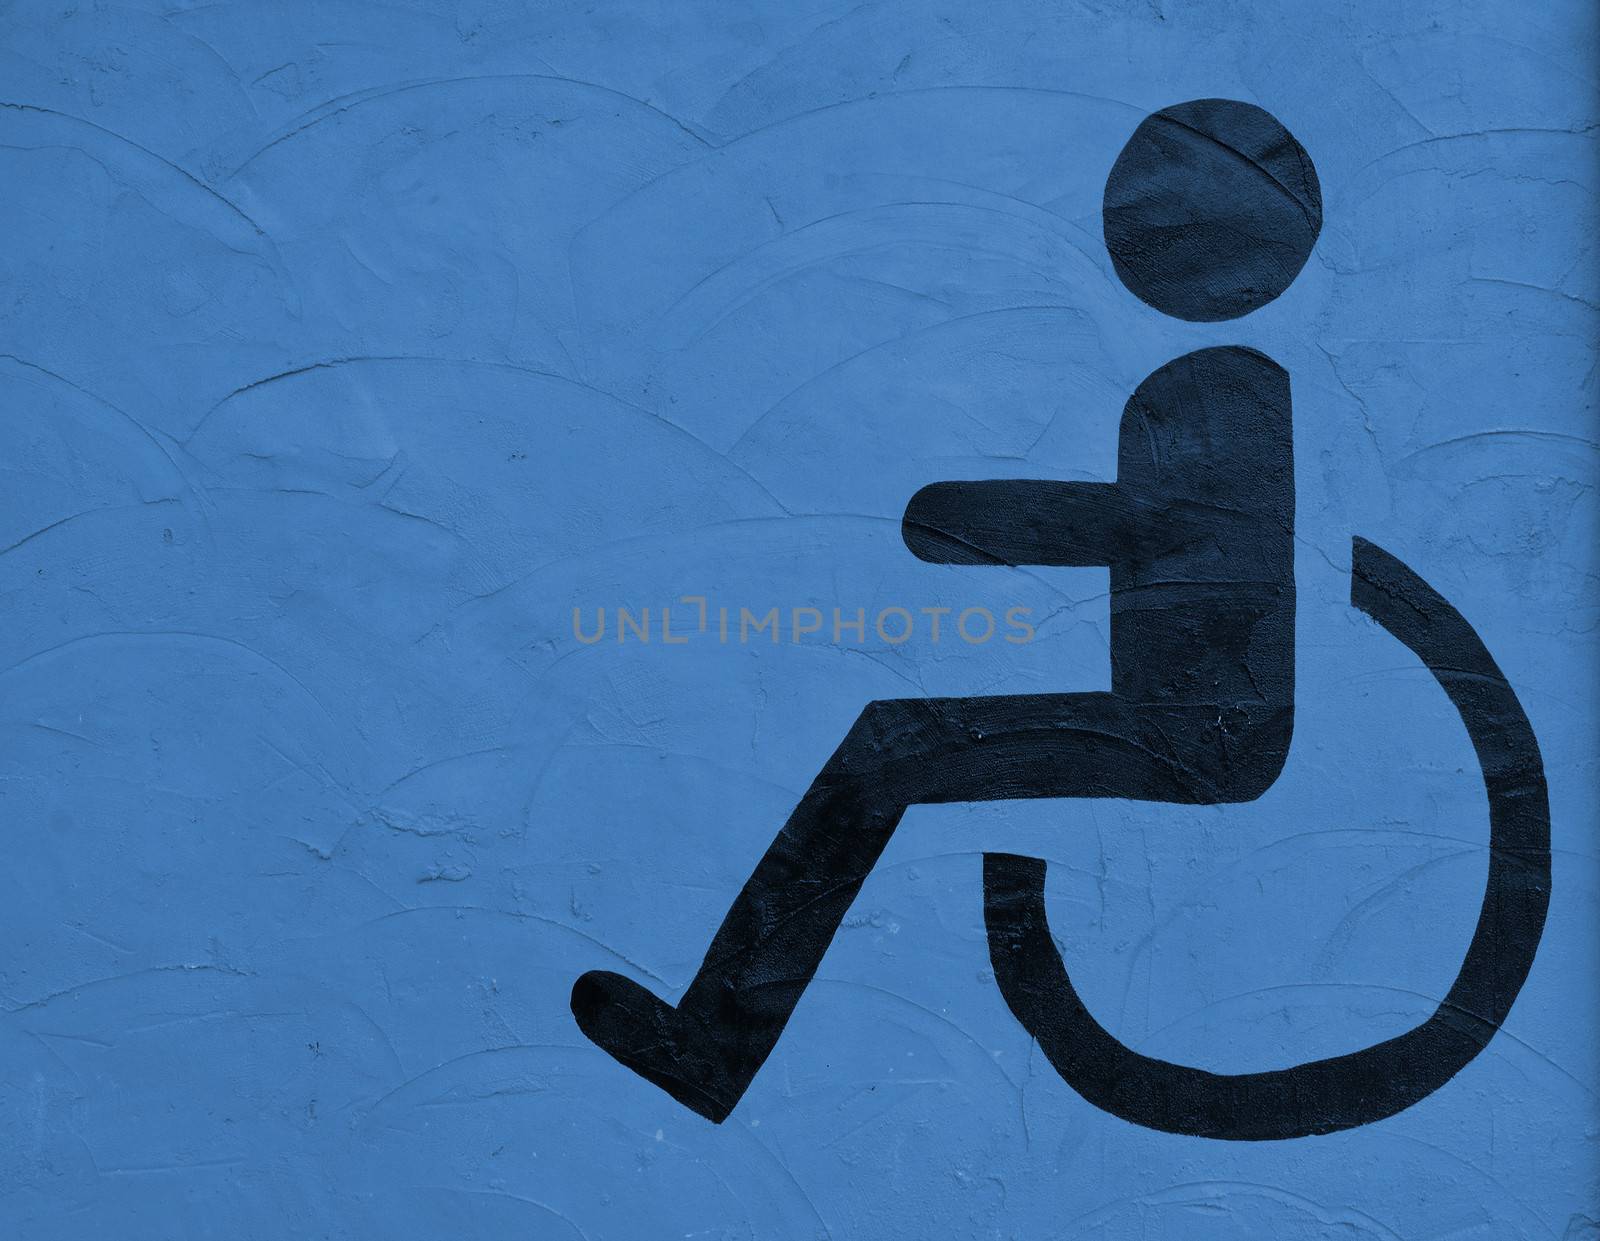 the symbol handicapped on blue wall background